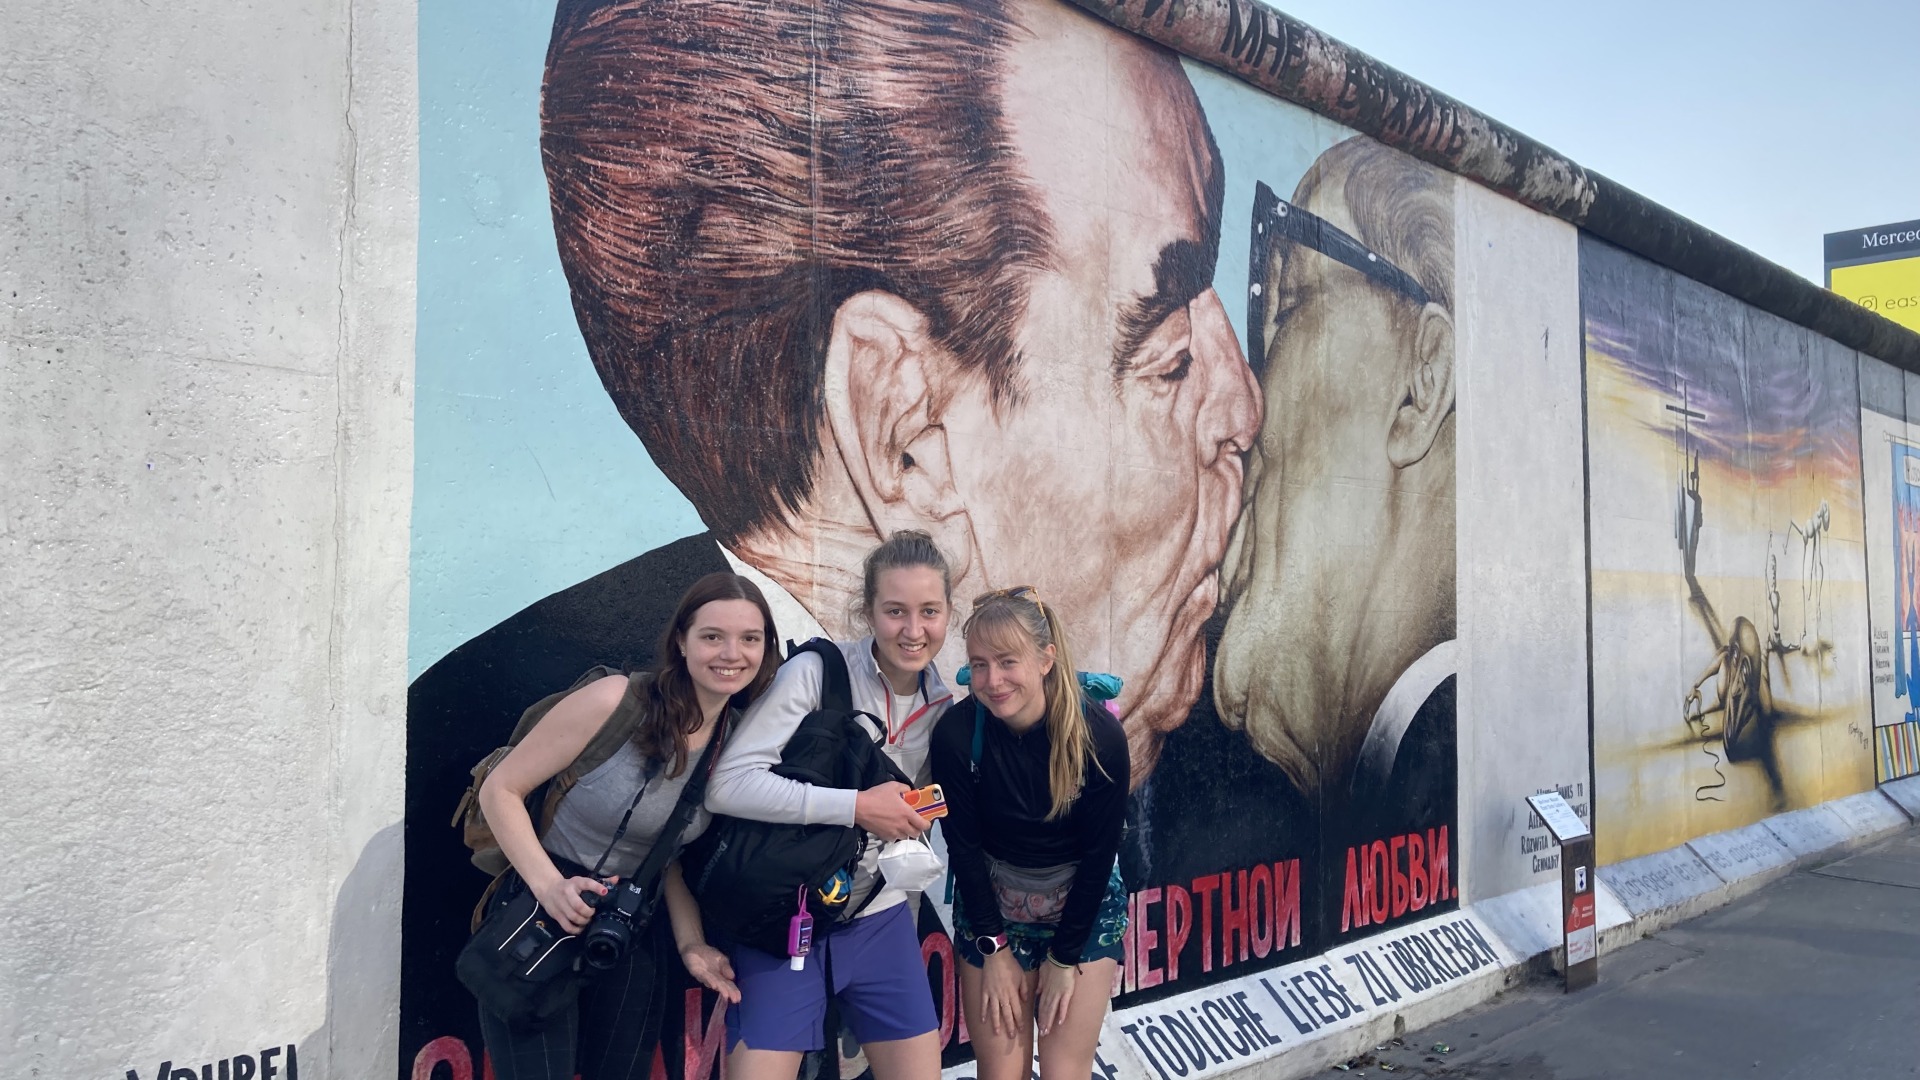 My classmates and I pose in front of the Berlin Wall graffiti